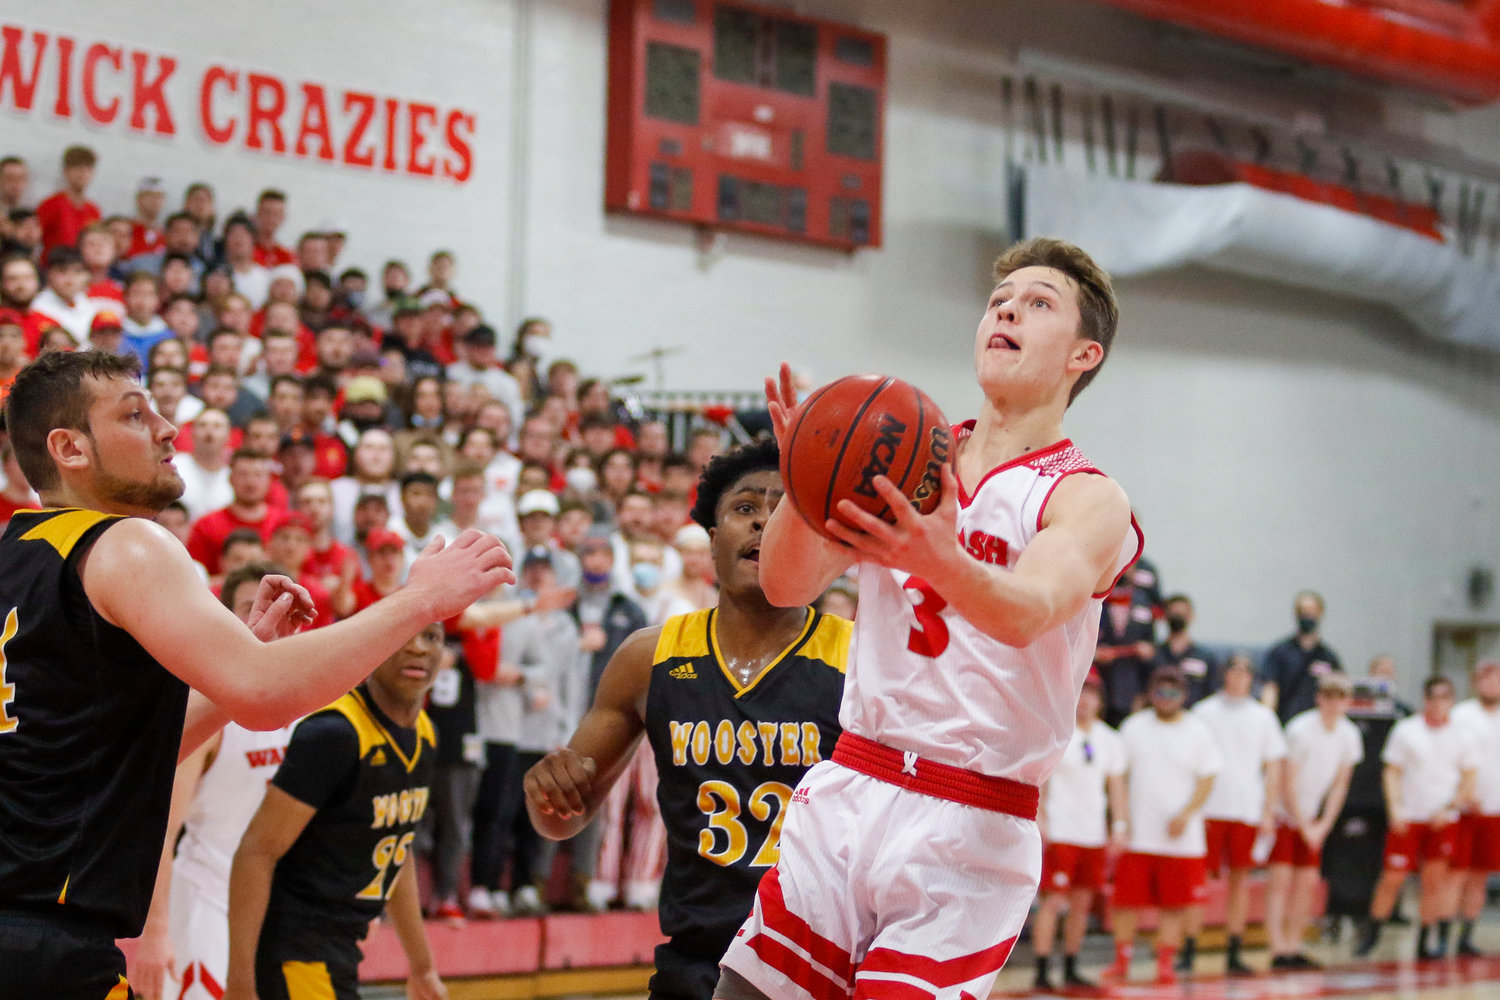 Jack Davidson is living out his professional dream of continuing his basketball career. The all-time leading scorer in Wabash College basketball history is currently on the training camp roster for the G-League Swarm.